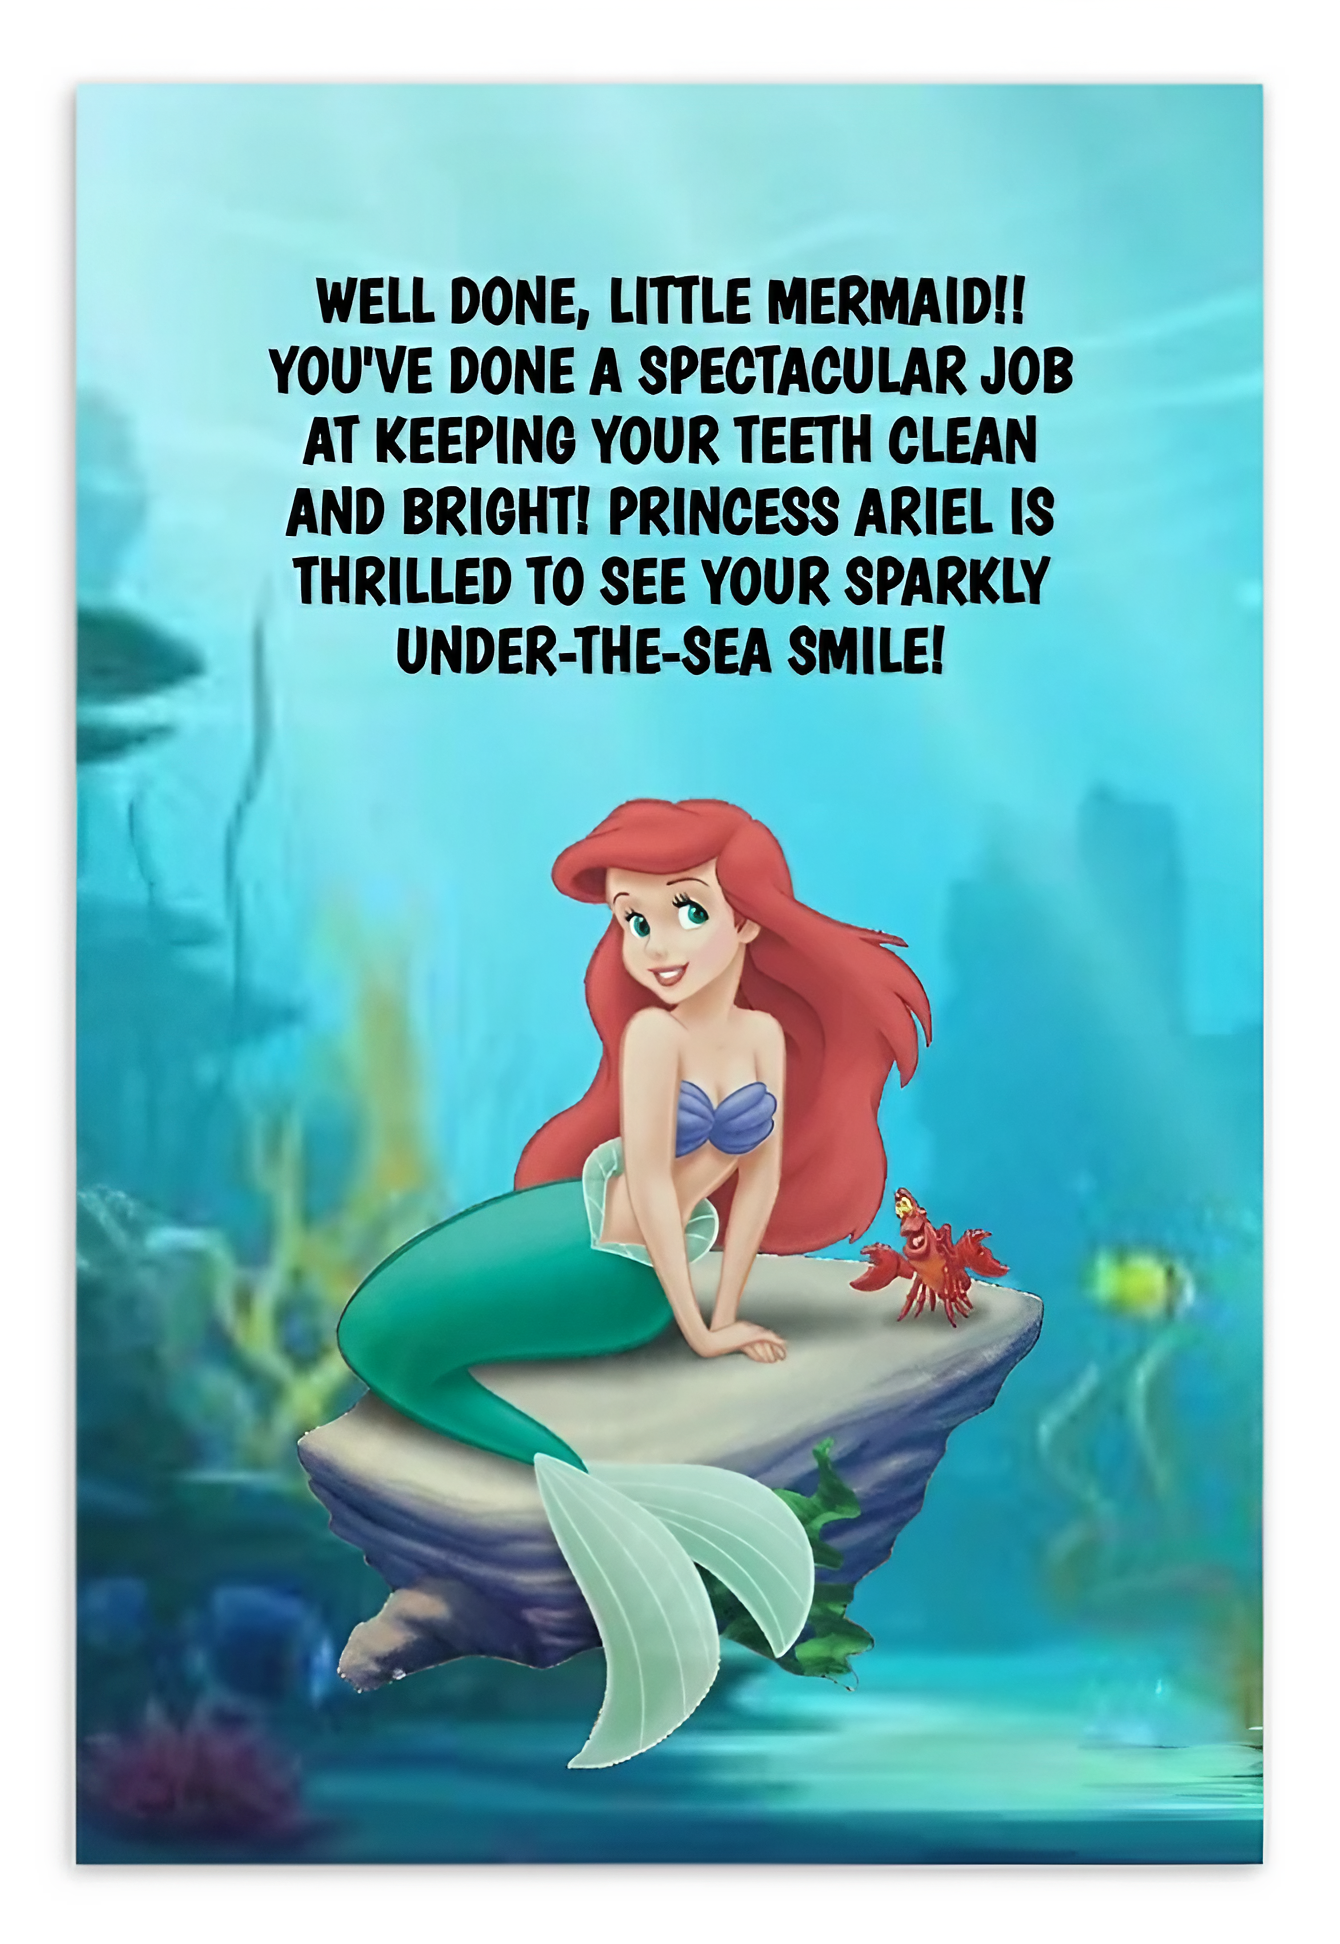 Dental Motivational & Reward Cards- Well Done, Little Mermaid!! You've Done A Spectacular Job At Keeping Your Teeth Clean And Bright!